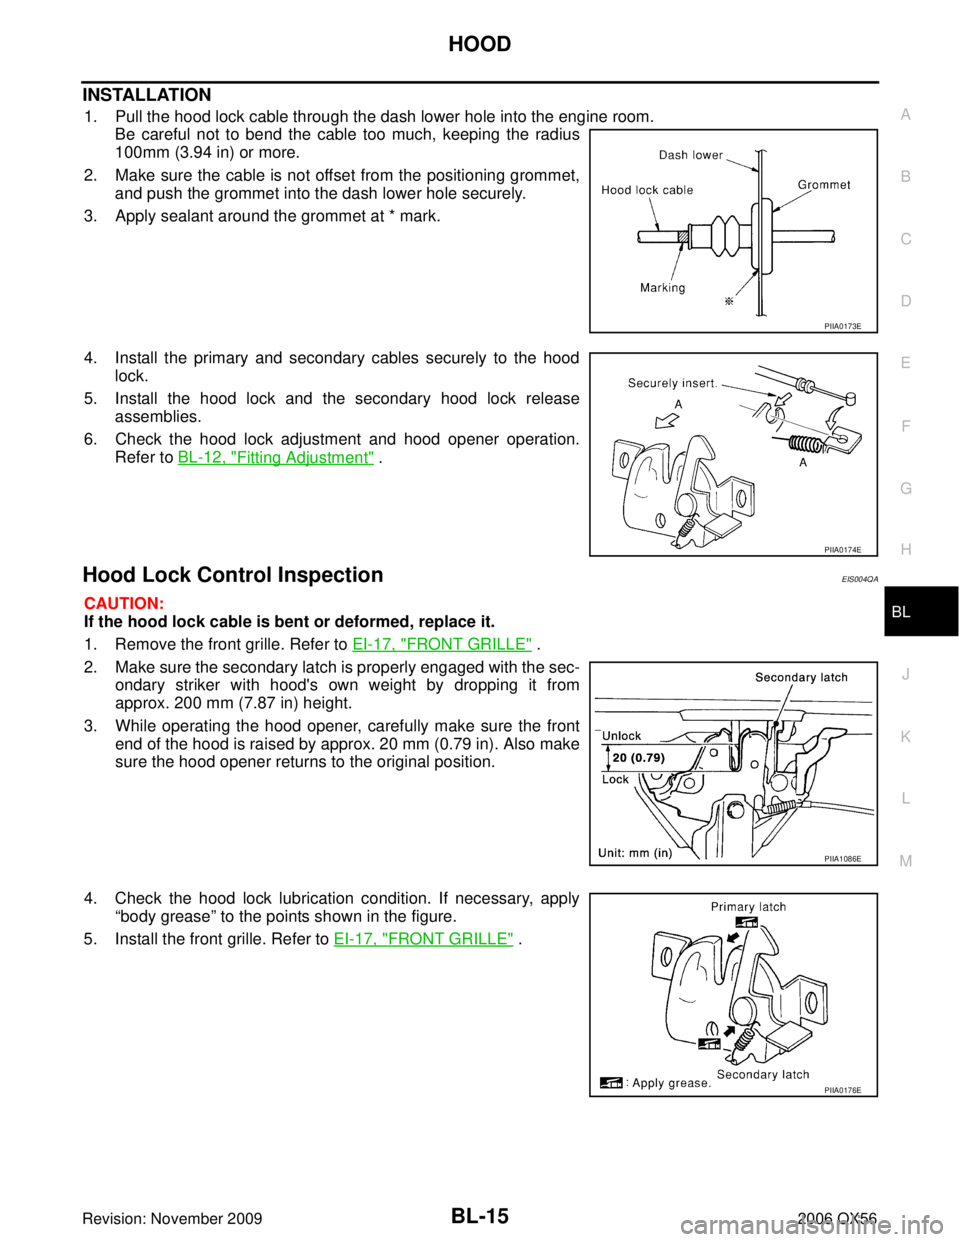 INFINITI QX56 2006  Factory Service Manual HOODBL-15
C
DE
F
G H
J
K L
M A
B
BL
Revision: November 2009 2006 QX56
INSTALLATION
1. Pull the hood lock cable through the dash lower hole into the engine room.
Be careful not to bend the cable too mu